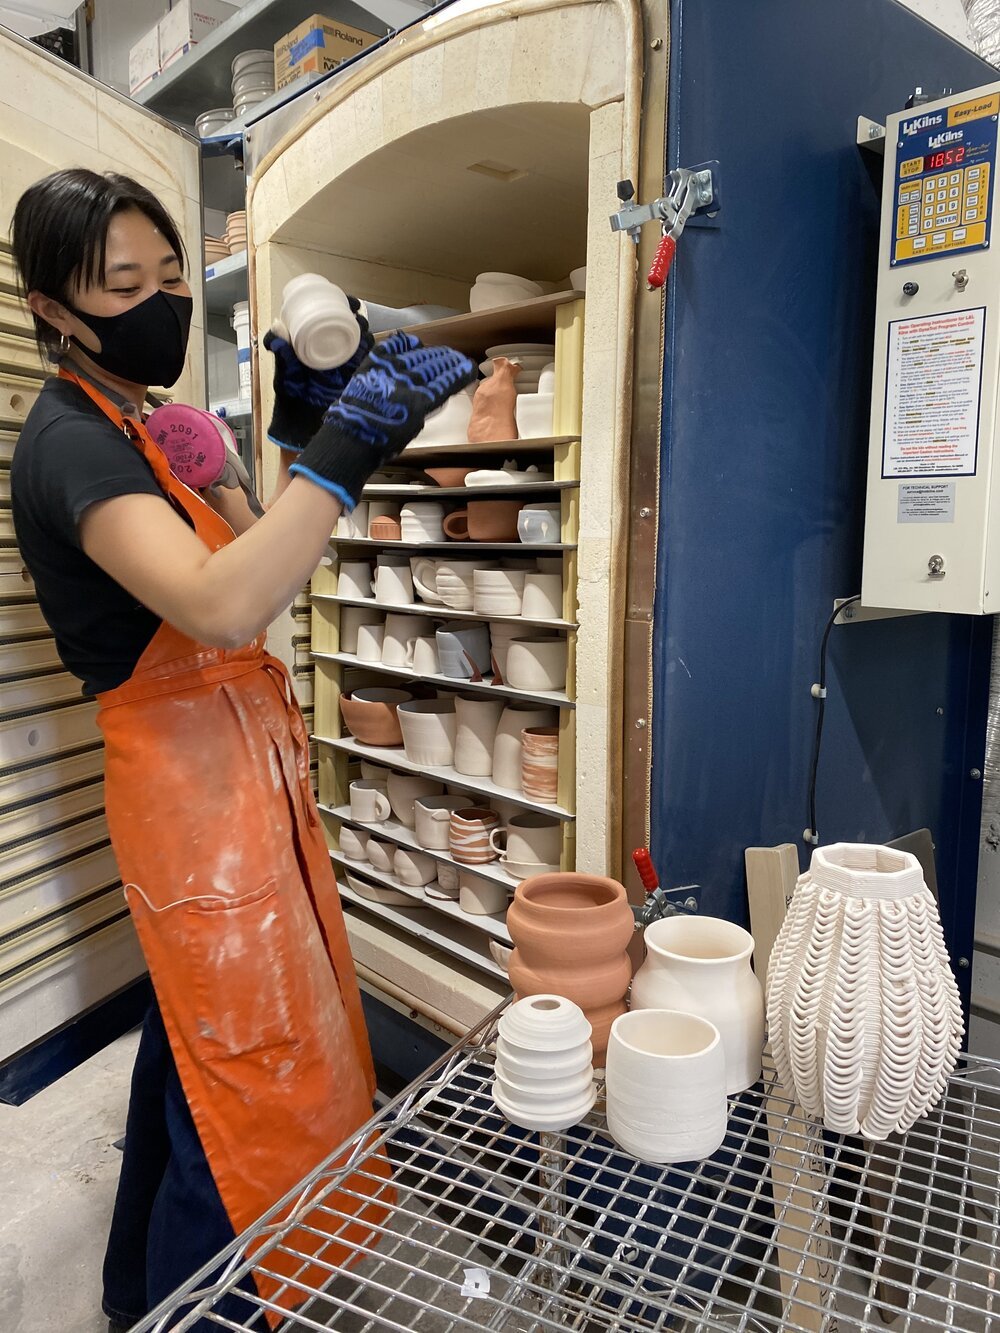 Ceramics Studio Cleaning and Safety 